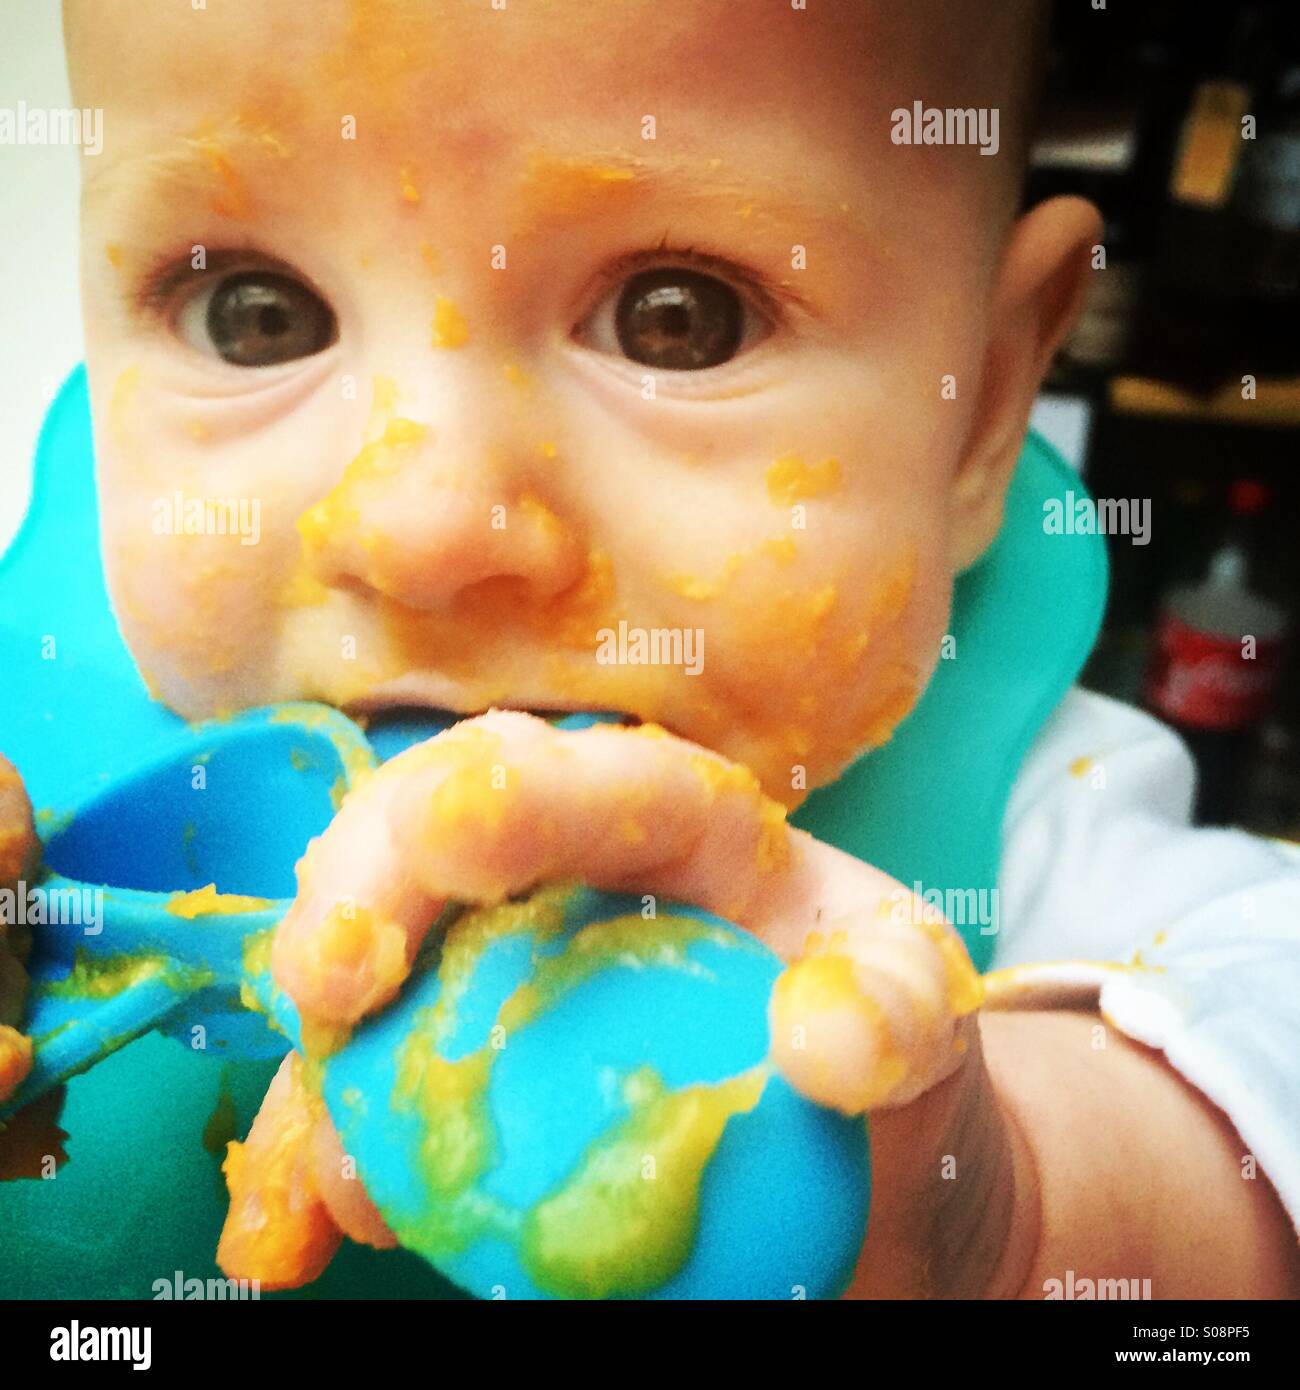 Baby boy nearly 6 months old clutches weaning spoon as he attempts to eat puréed squash Stock Photo